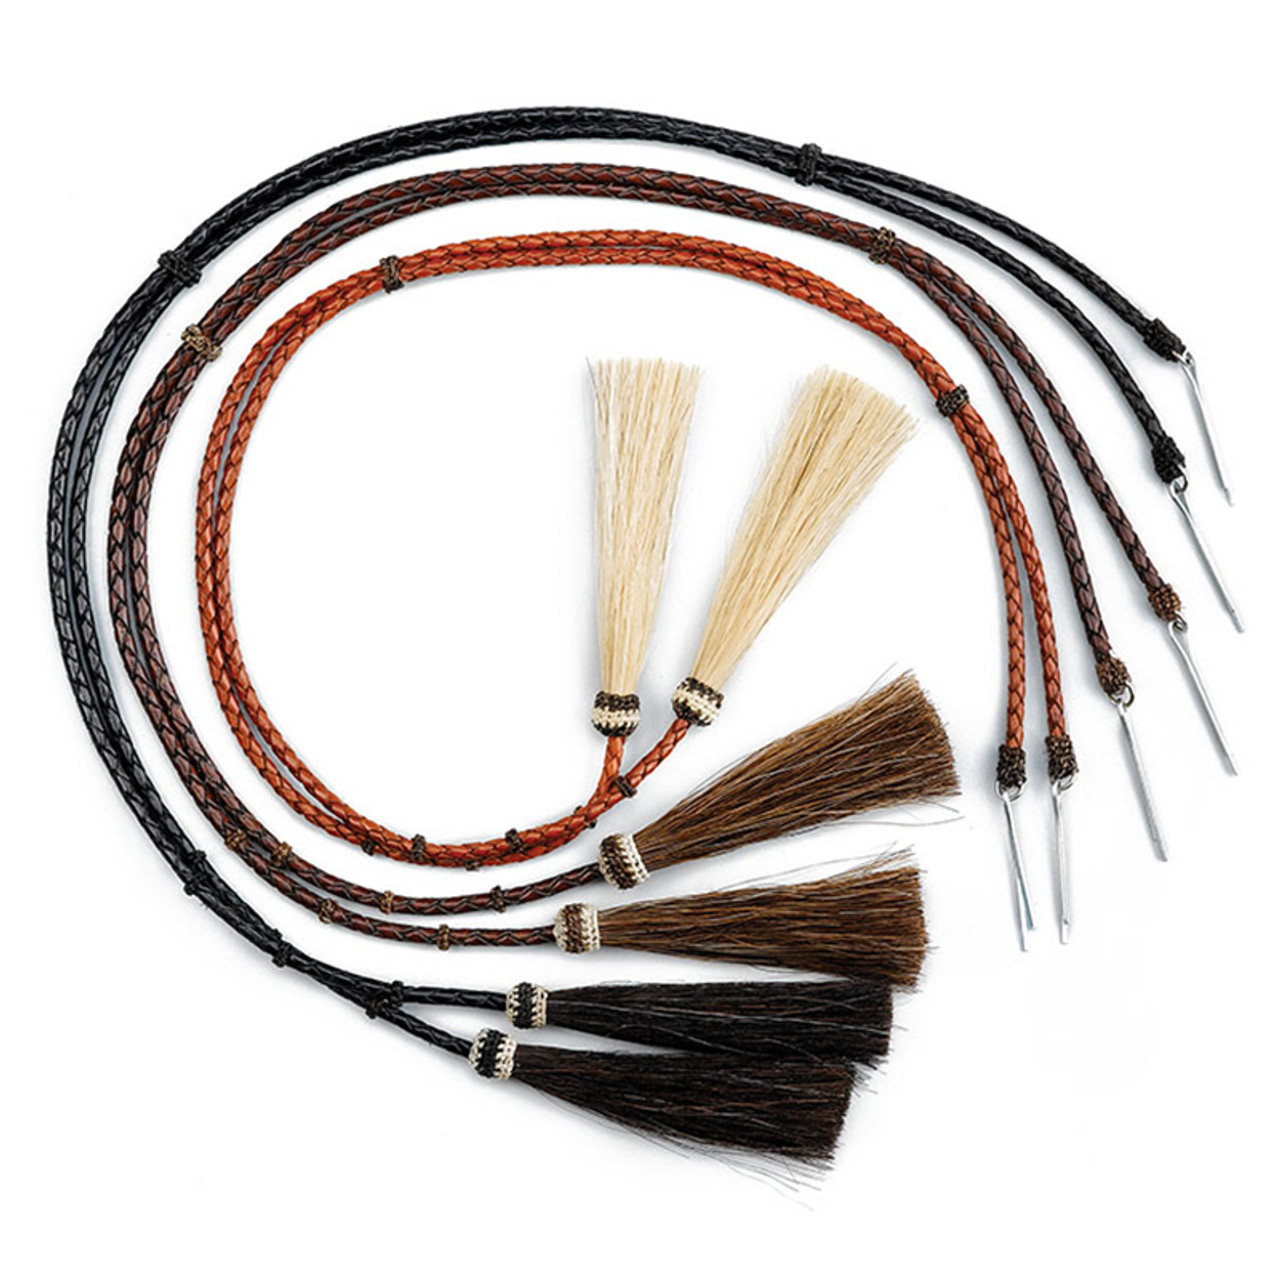 Leather Stampede Strings with Horse Hair Tassles - Western Express